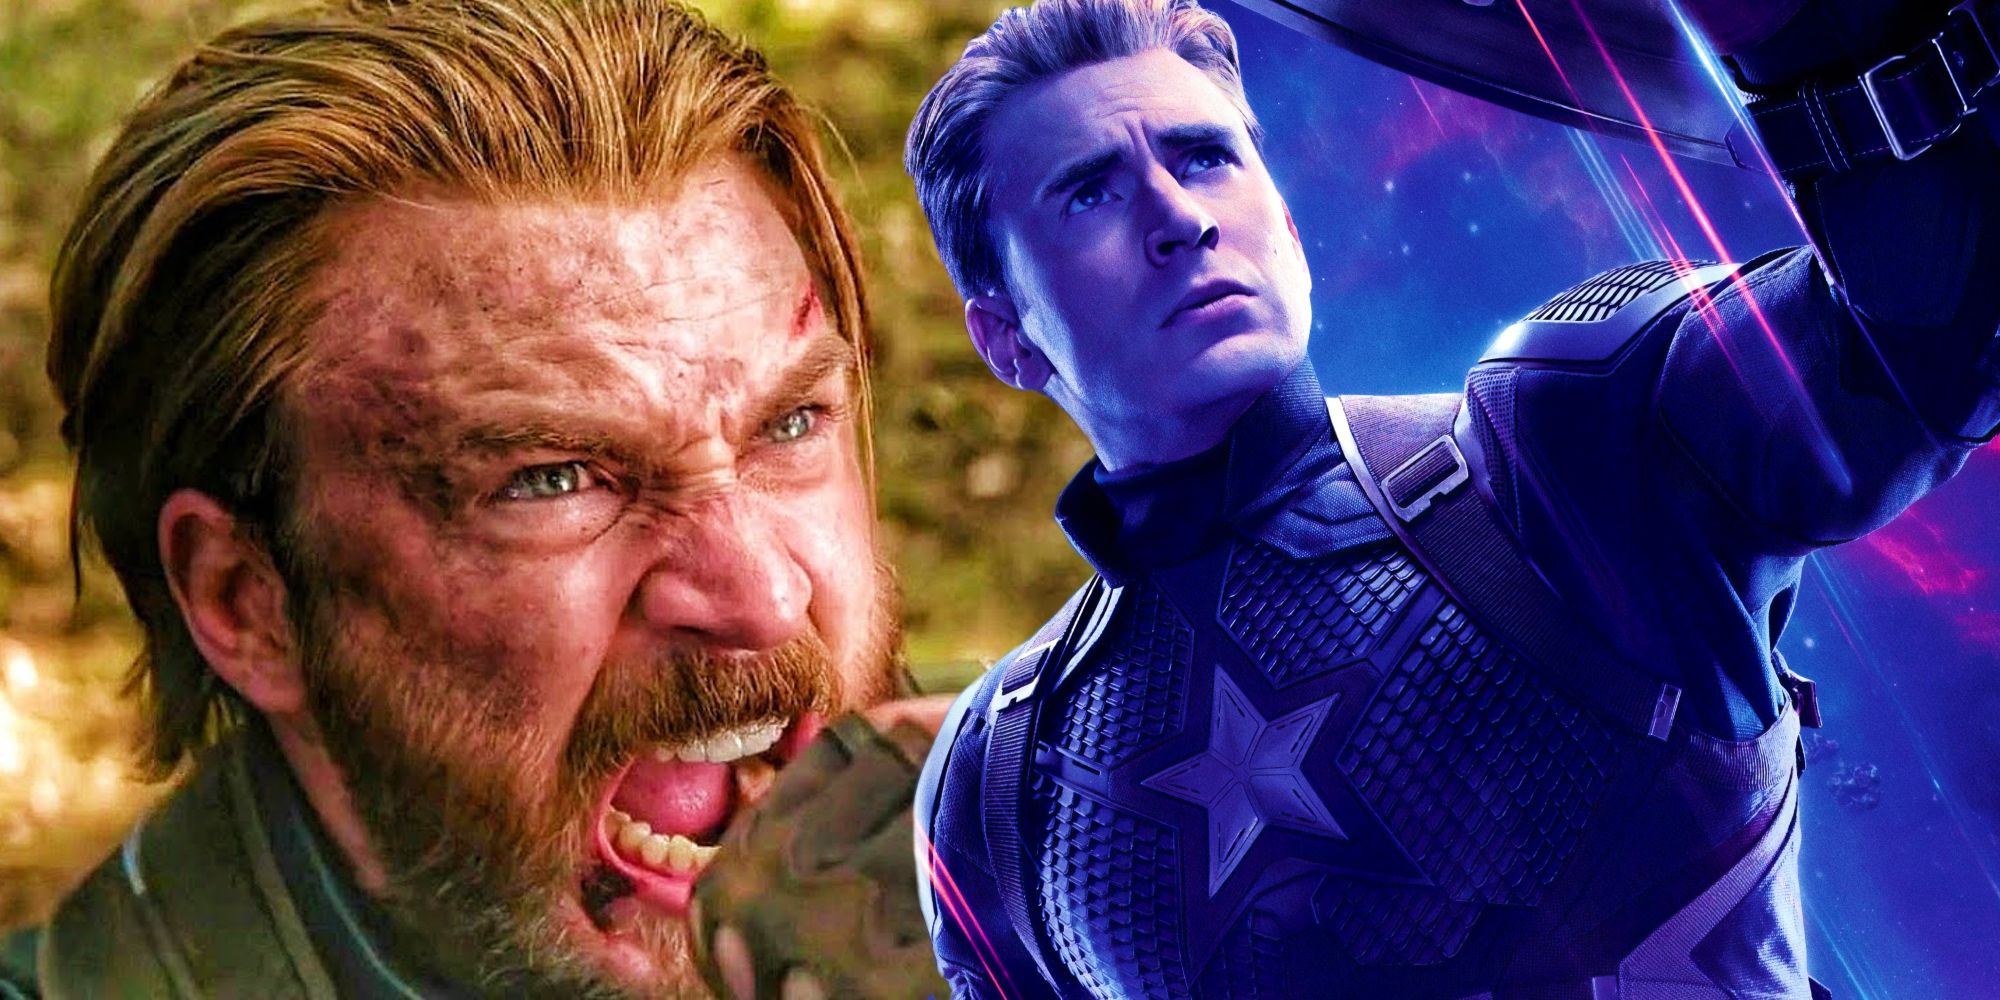 Captain America's Endgame poster next to Cap holding back Thanos' Gauntlet in Infinity War